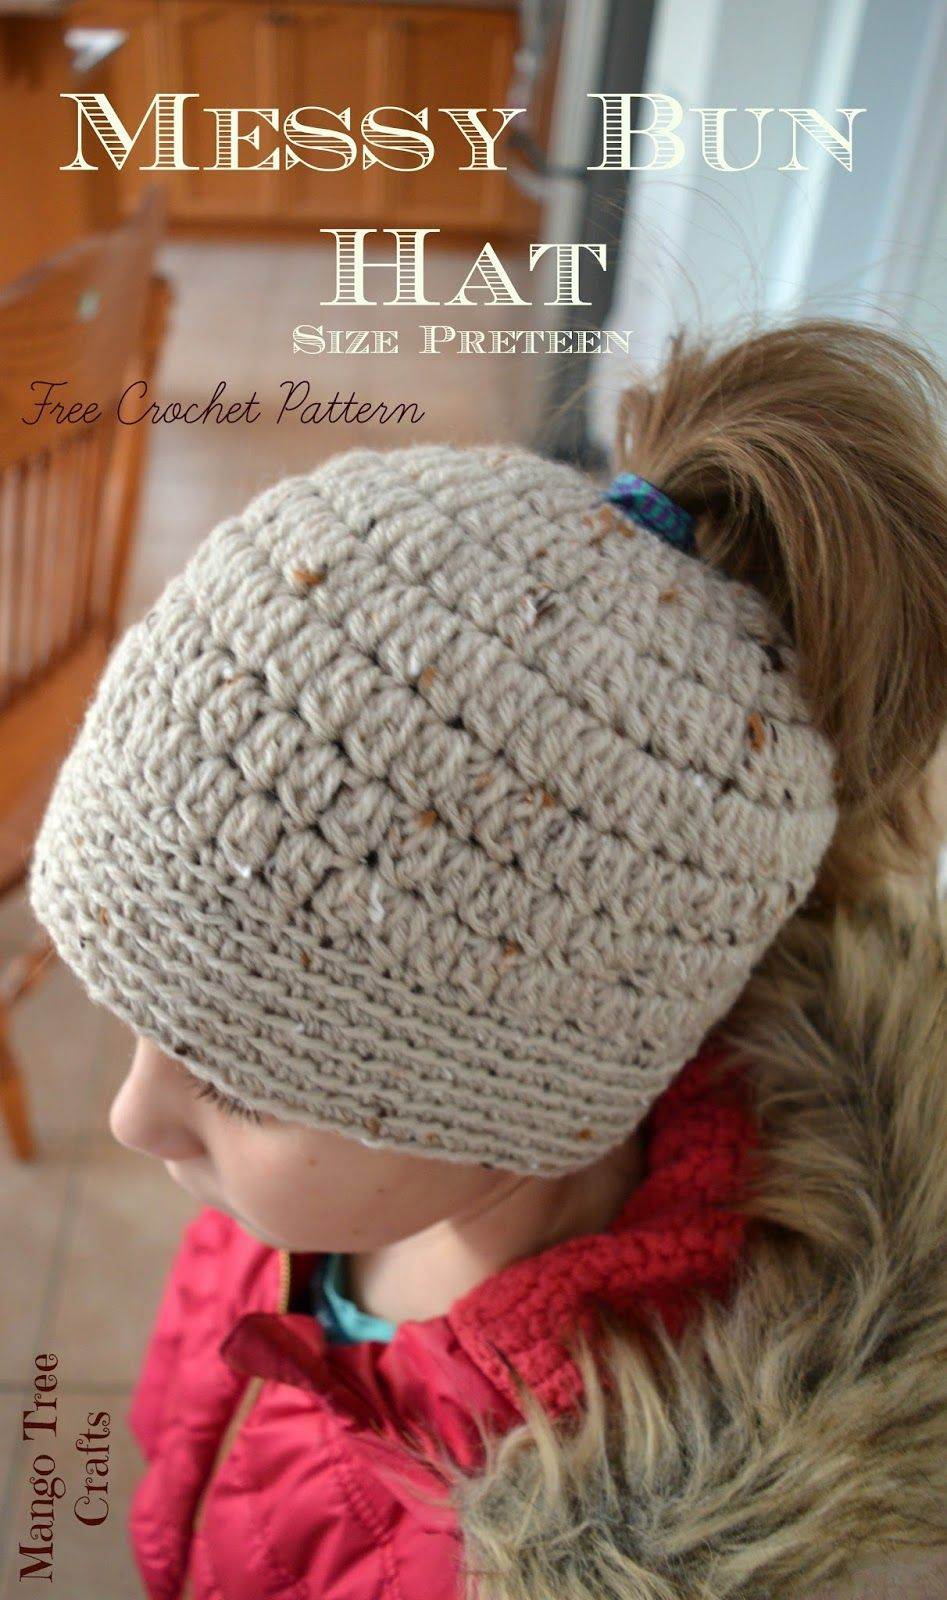 Ponytail Crochet Hat Pattern Free Messy Bun Hairstyle Has Been A Huge Hit In 2016 Many Crochet Messy